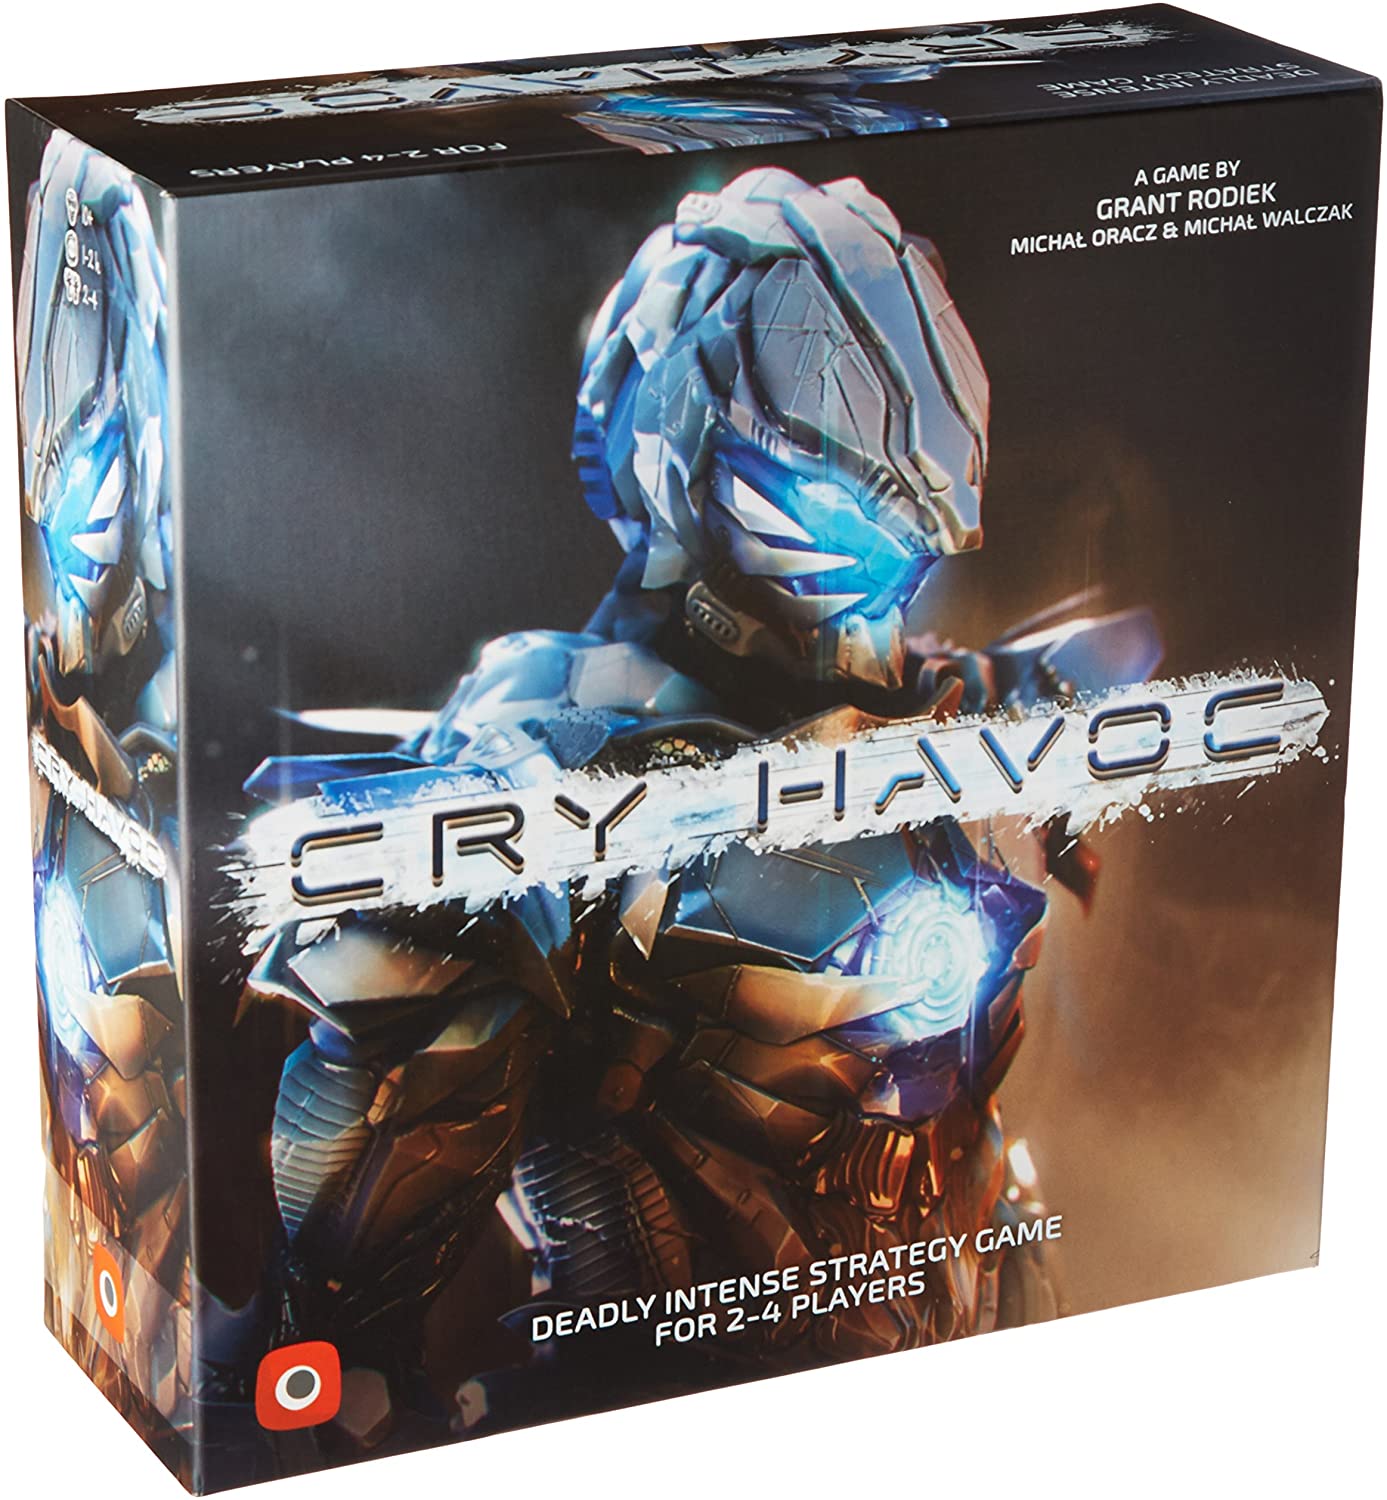 Portal Games Cry Havoc Board Game